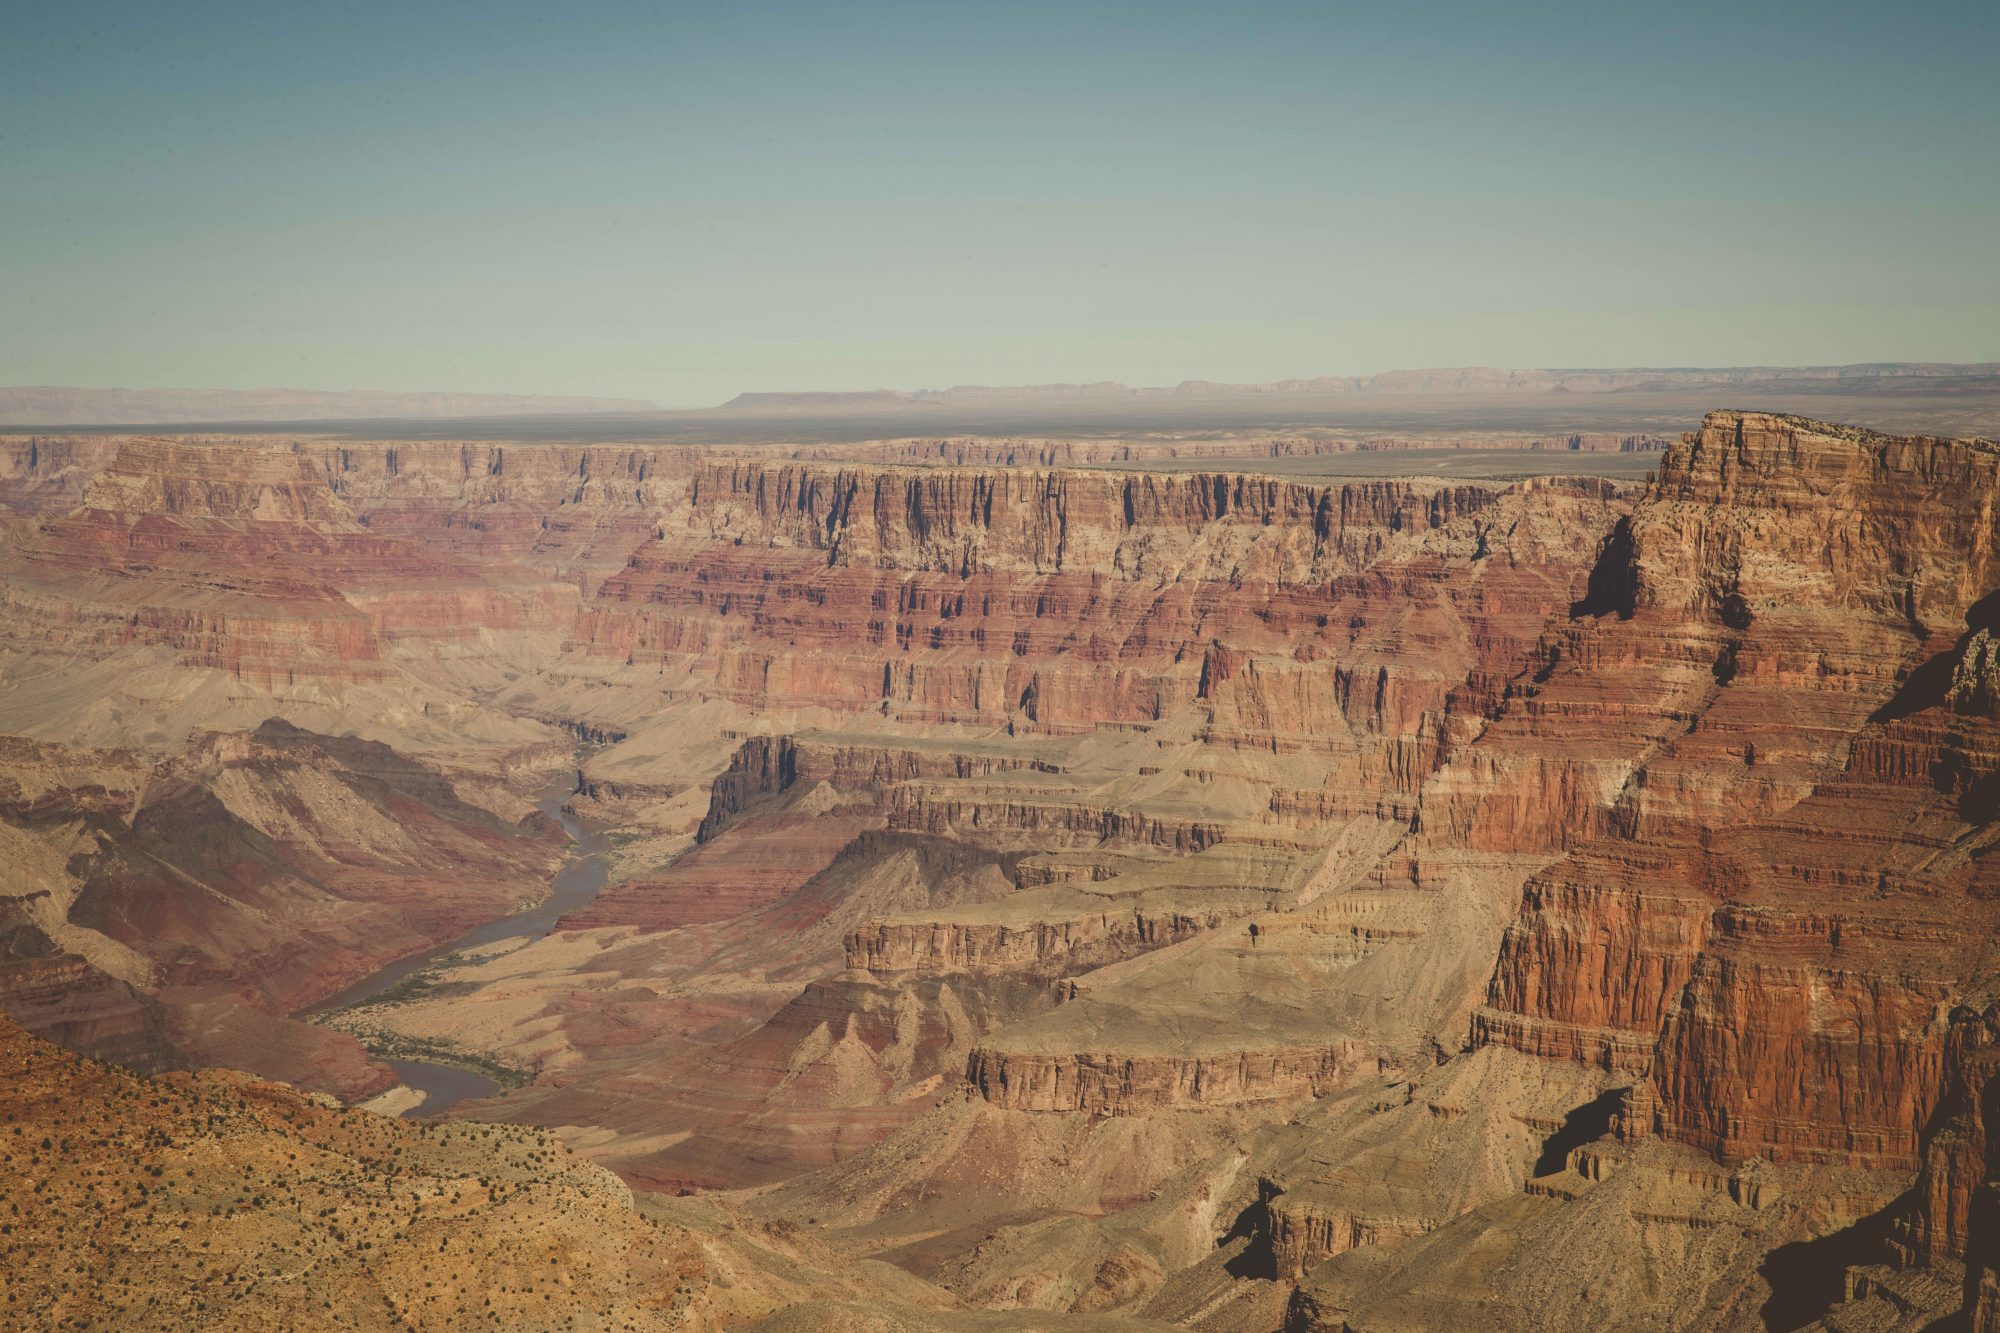 View of the Grand Canyon and the Colorado River winding through the bottom